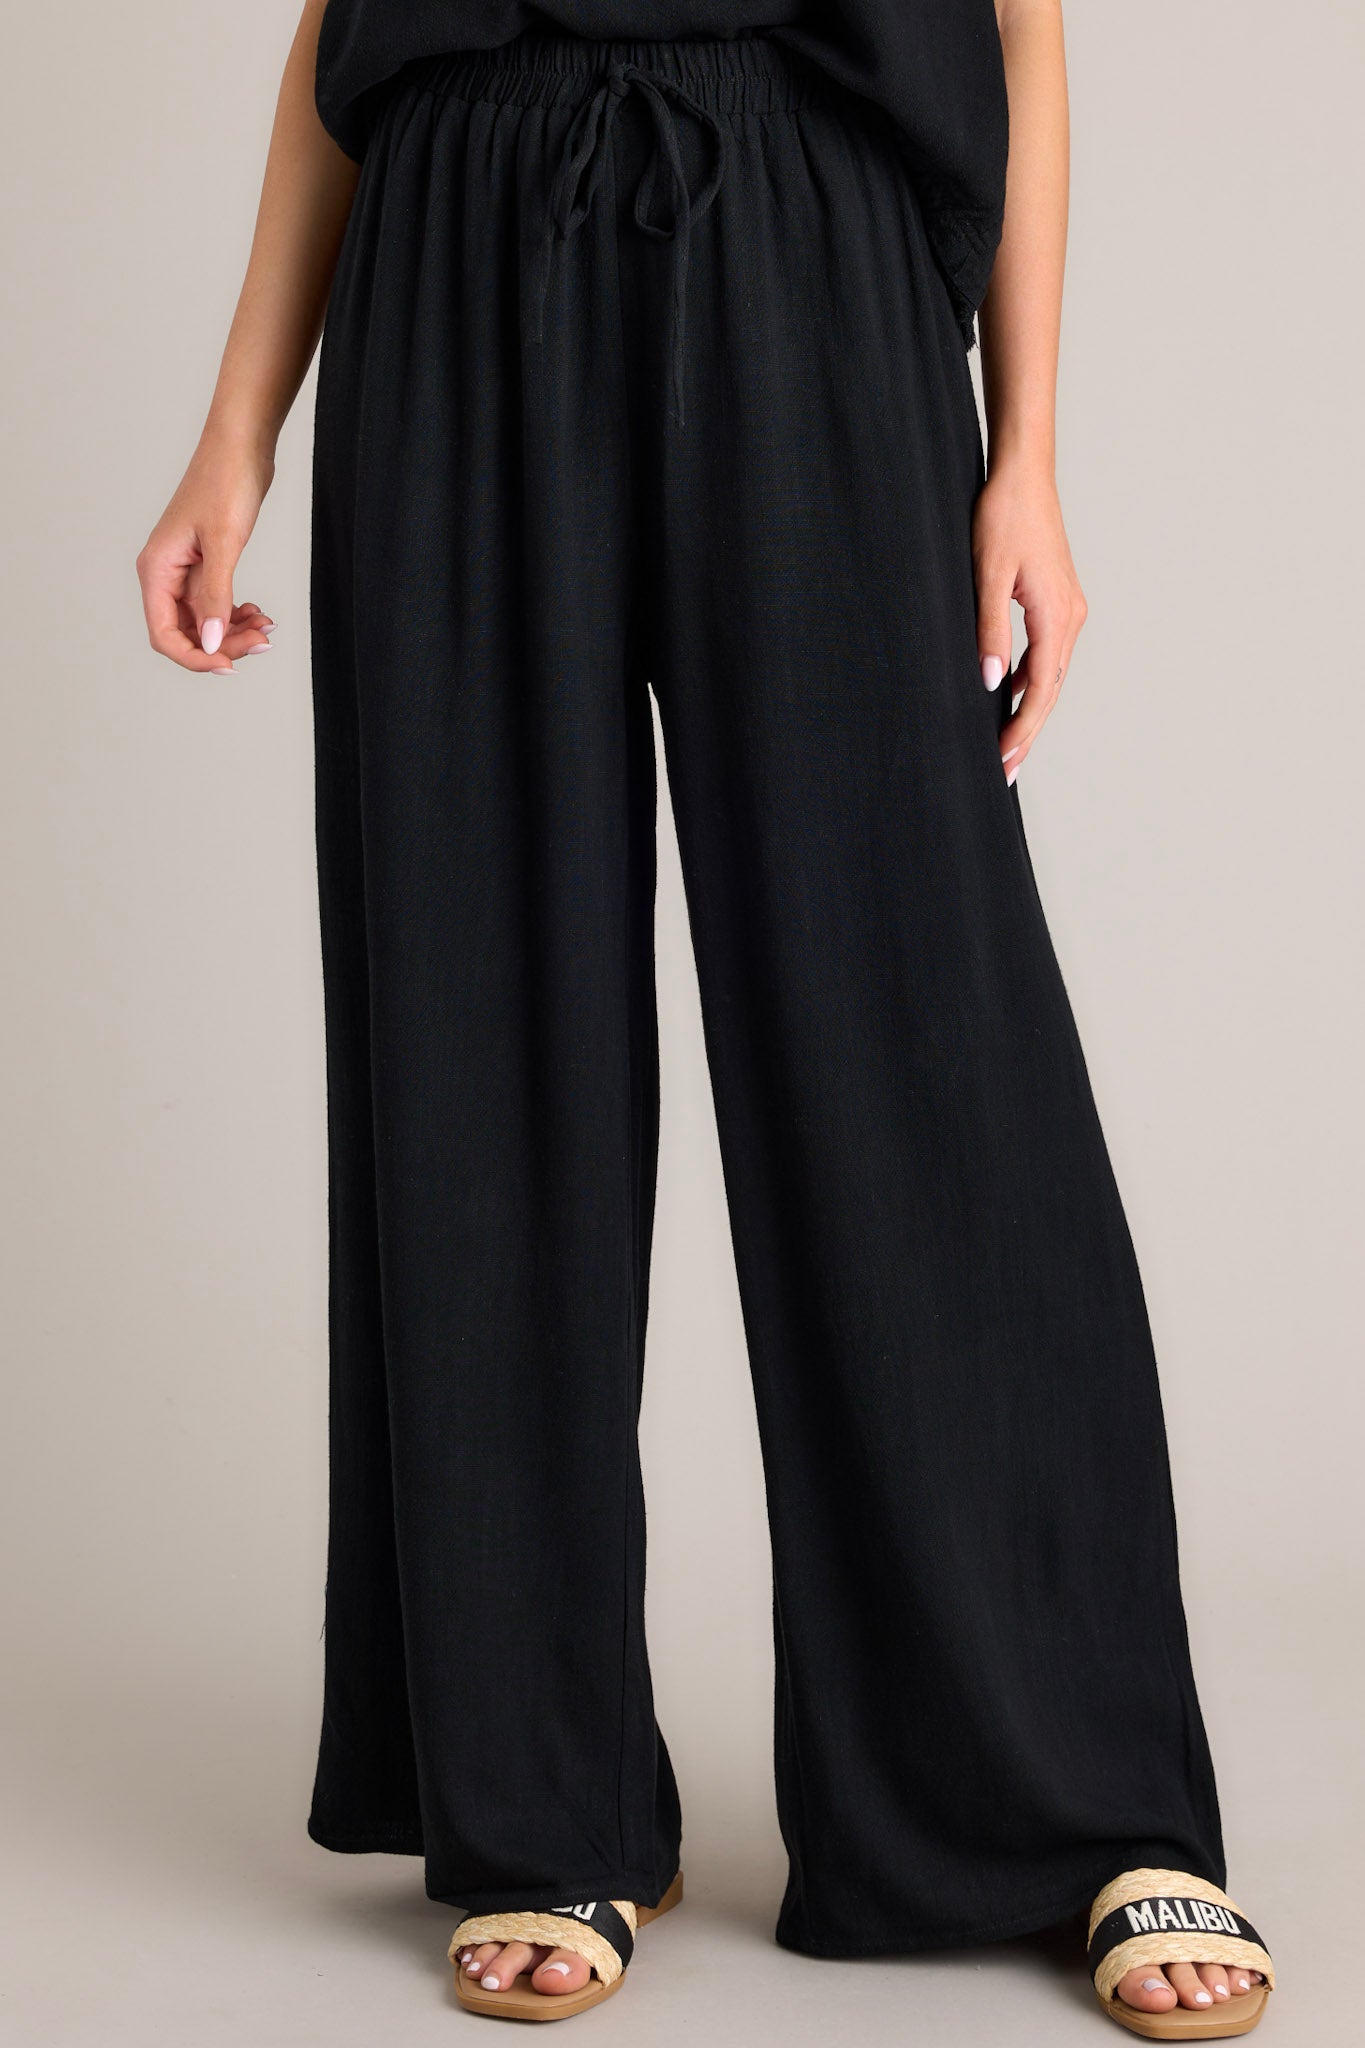 These black pants feature a high waisted design, an elastic waistband, a self-tie waist feature, and a wide leg.